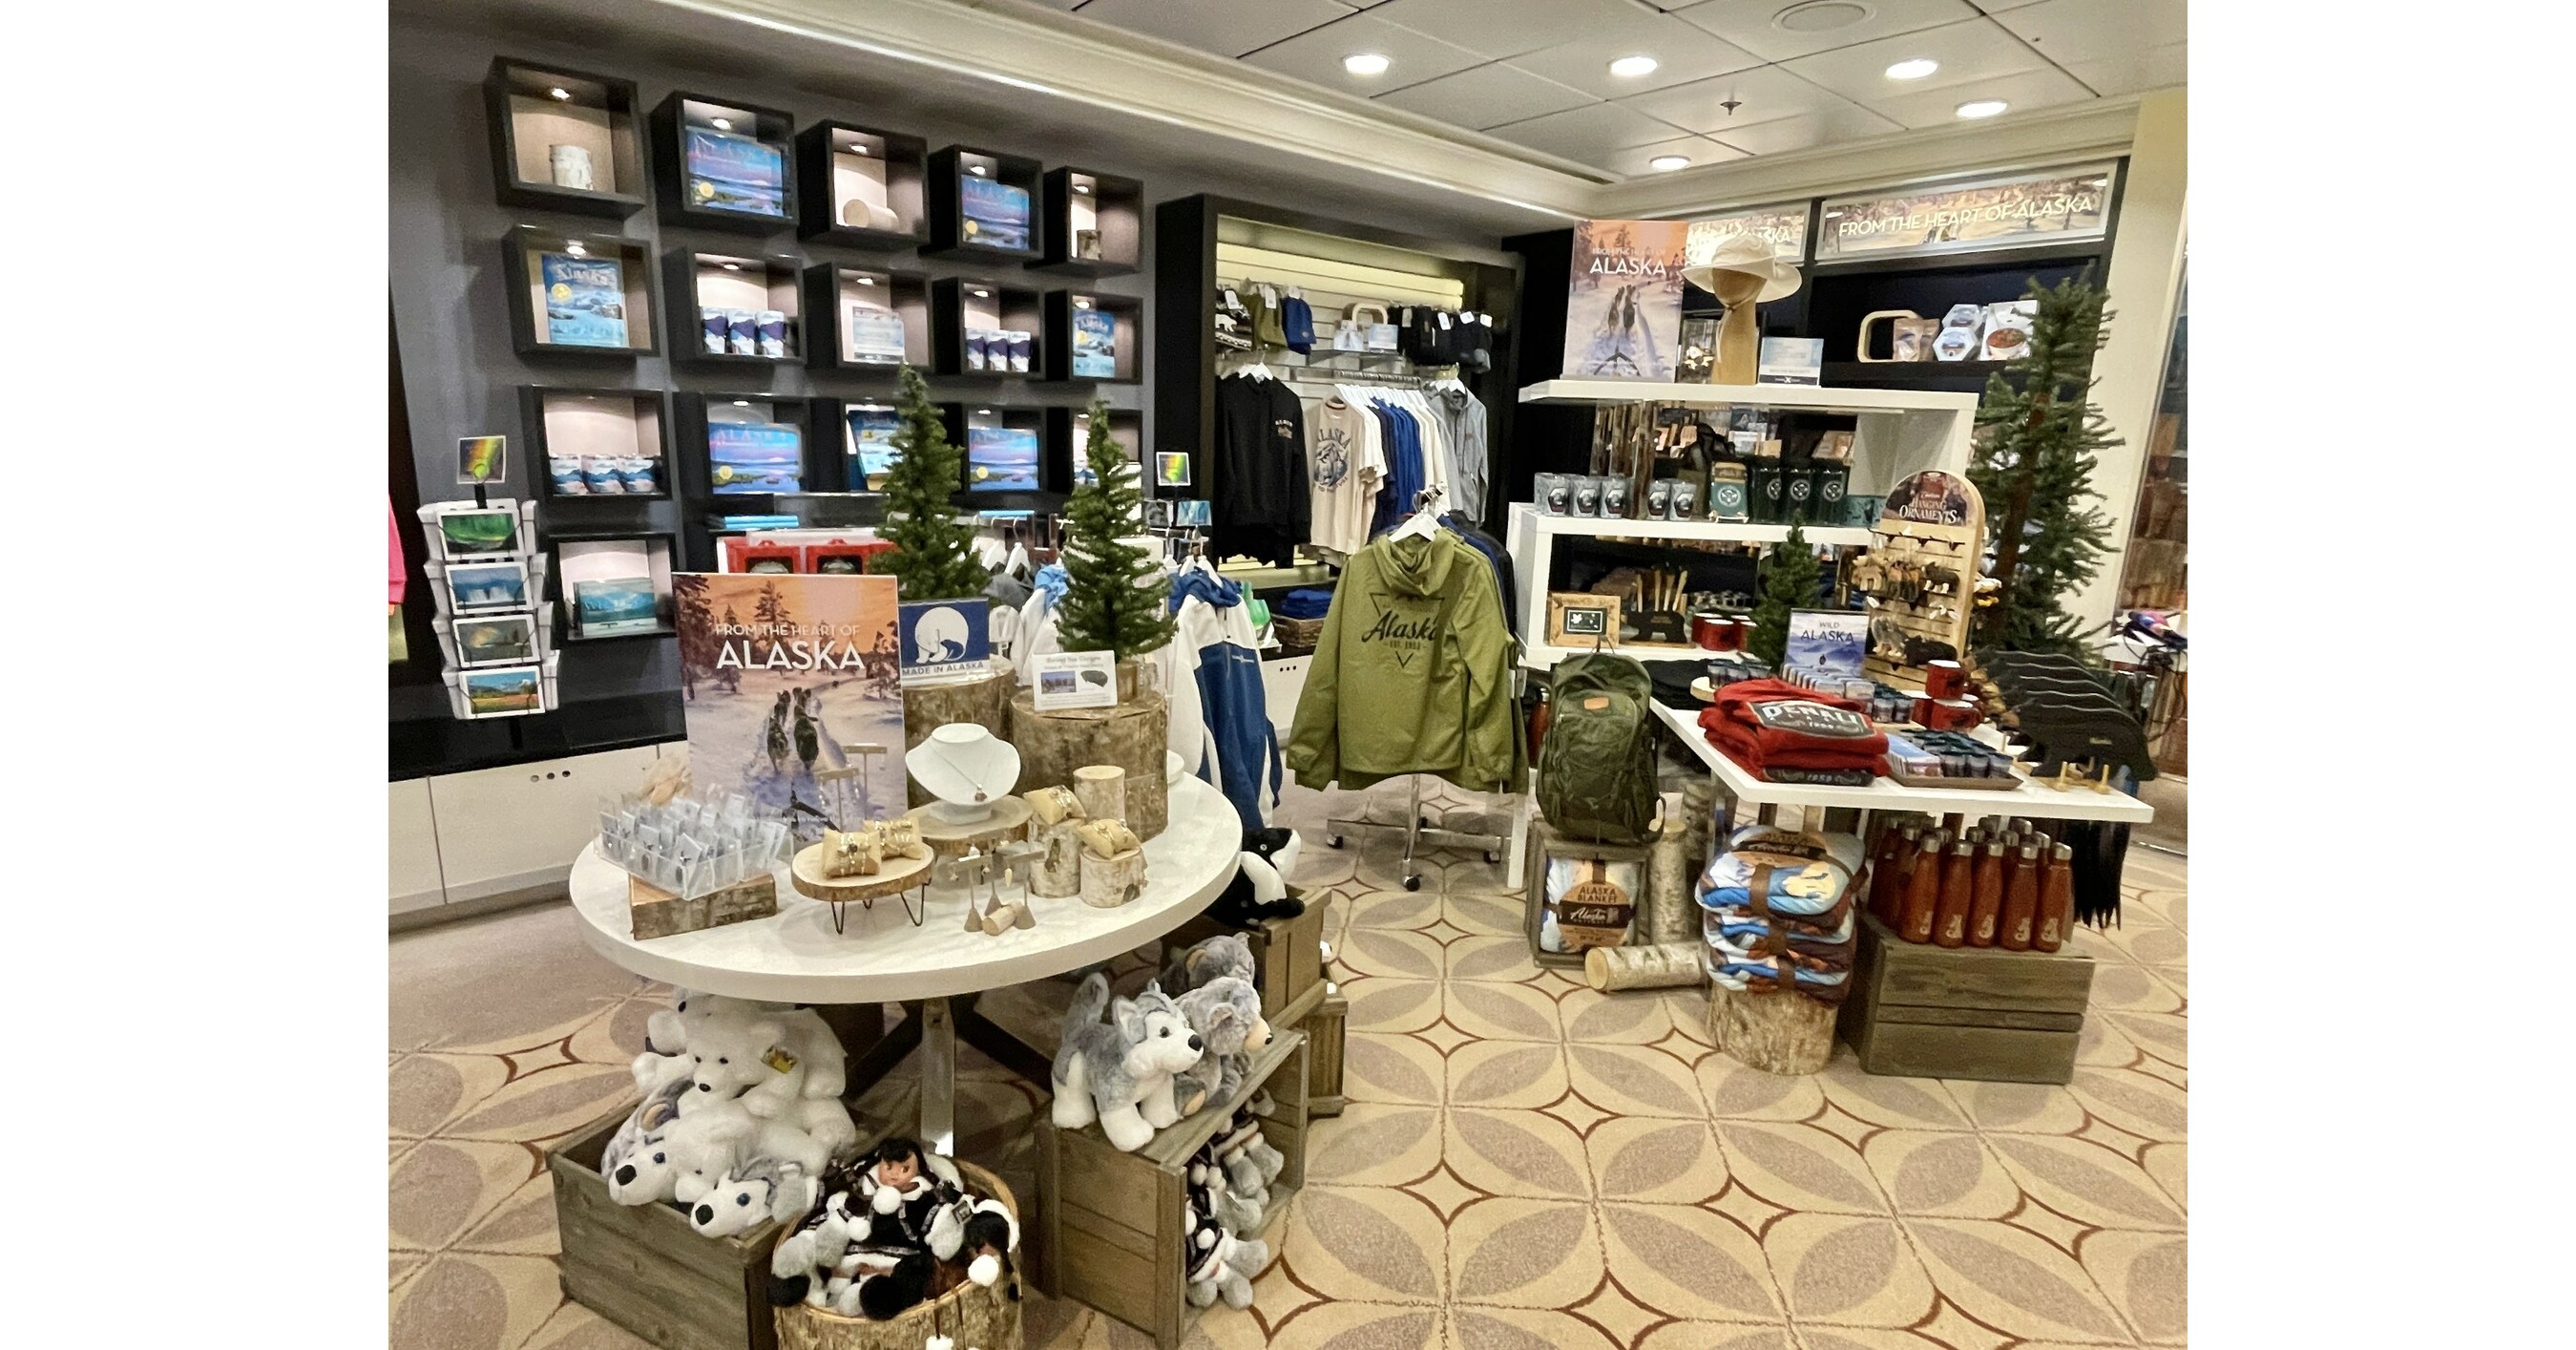 Starboard Cruise 'Fun Shops' Less About Transactions Than Creating  Experiences - Retail TouchPoints